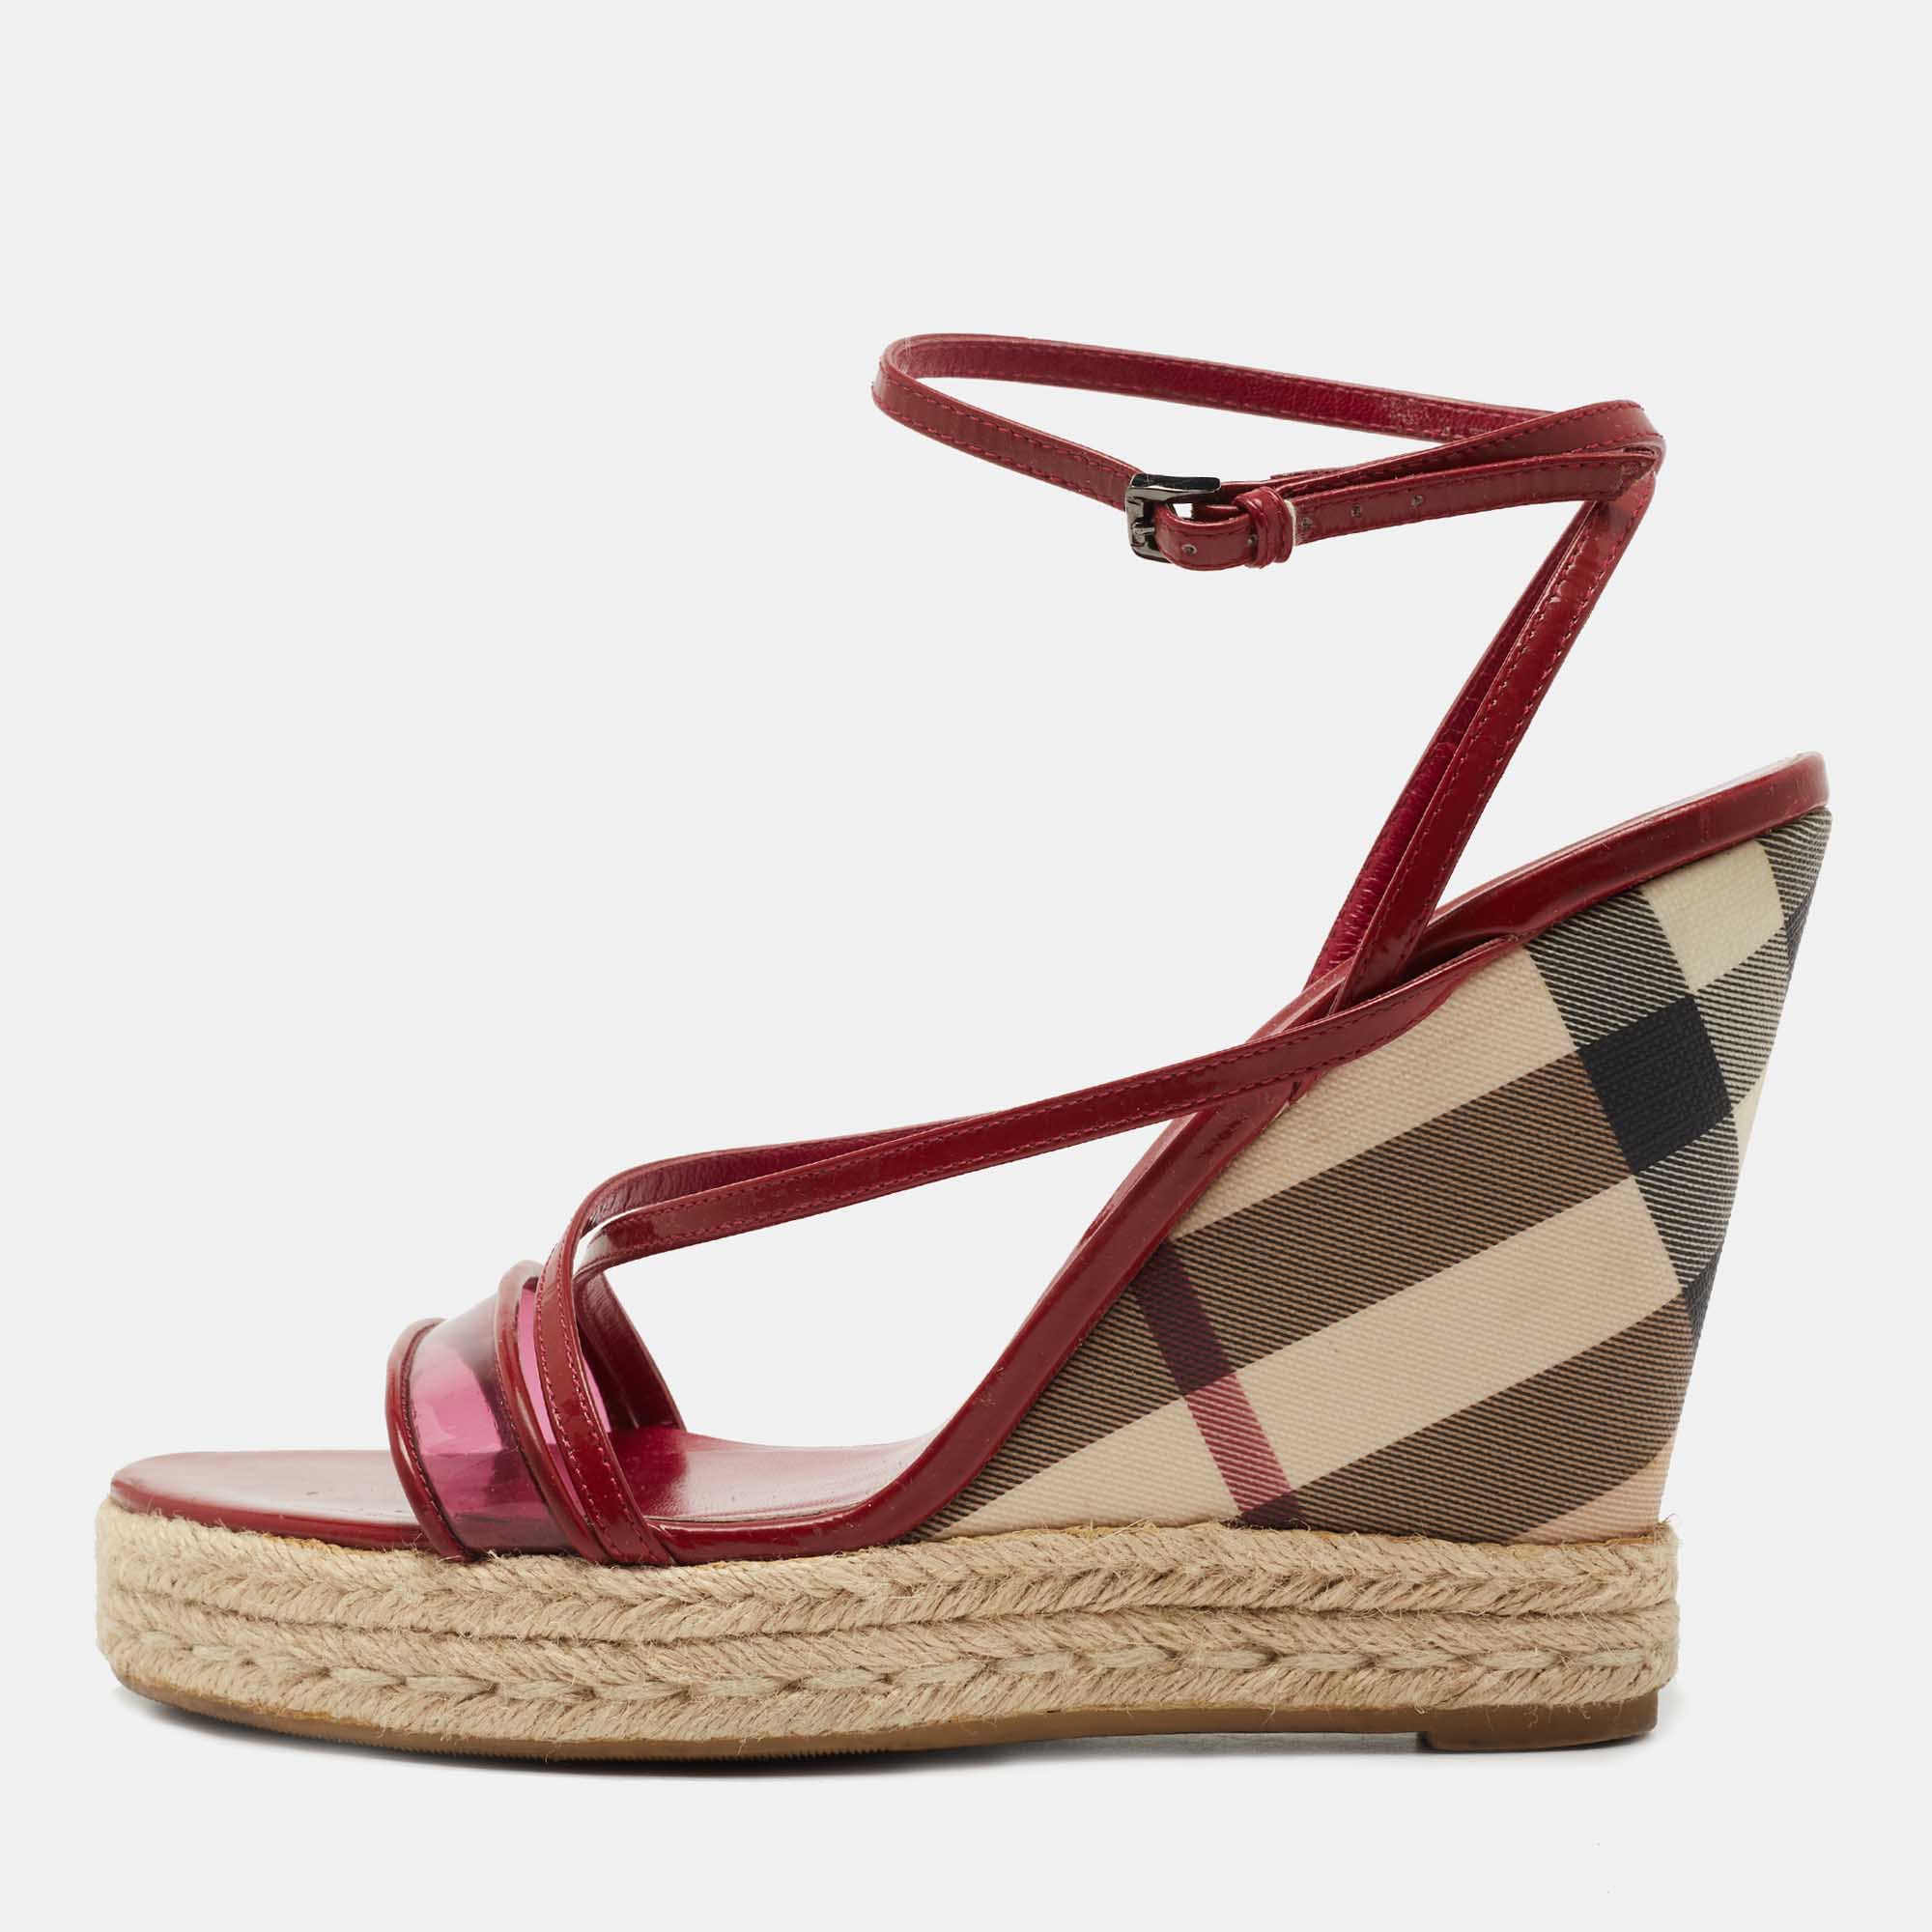 Chic Maroon Style: Burberry House Check Sandal Espadrilles